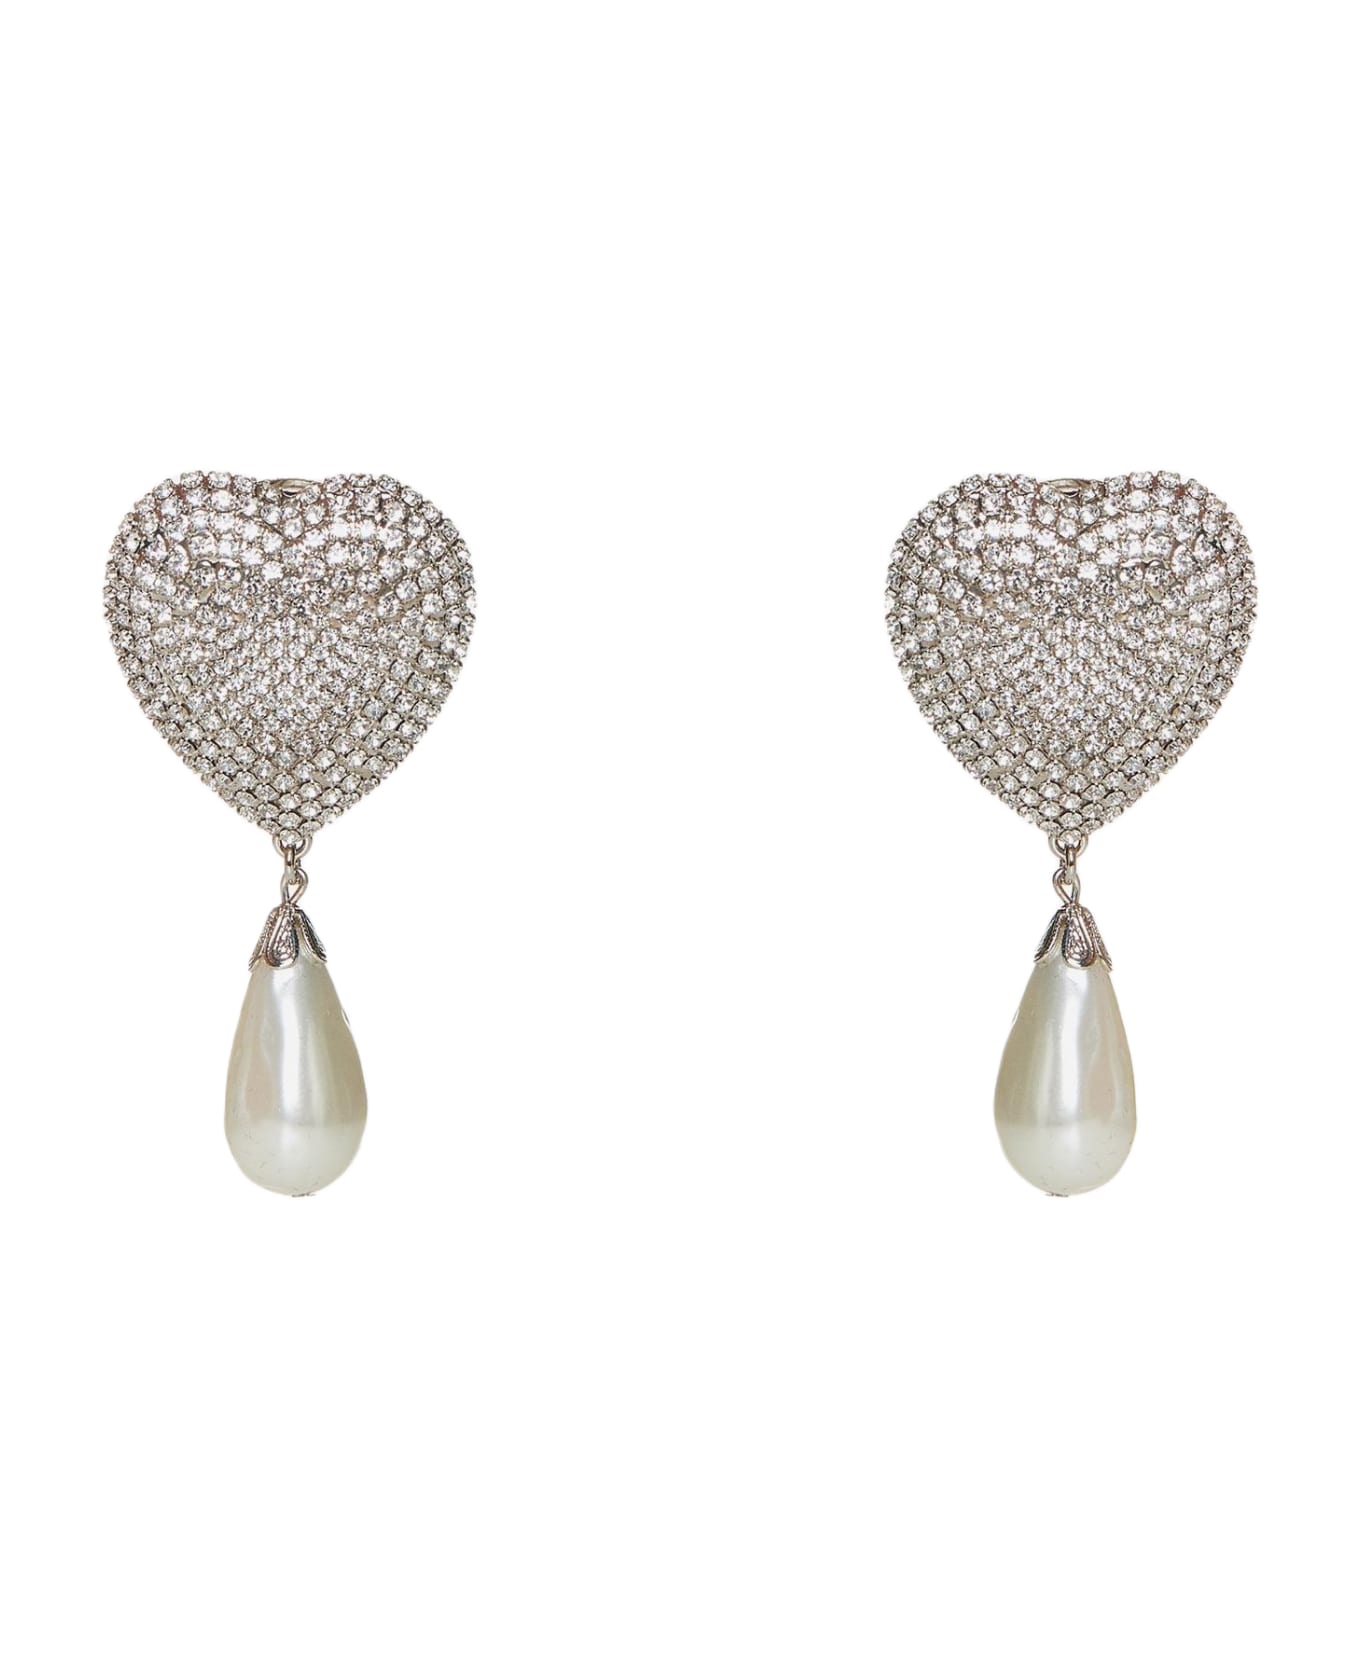 Alessandra Rich Heart Crystals And Pearl Earrings - Silver